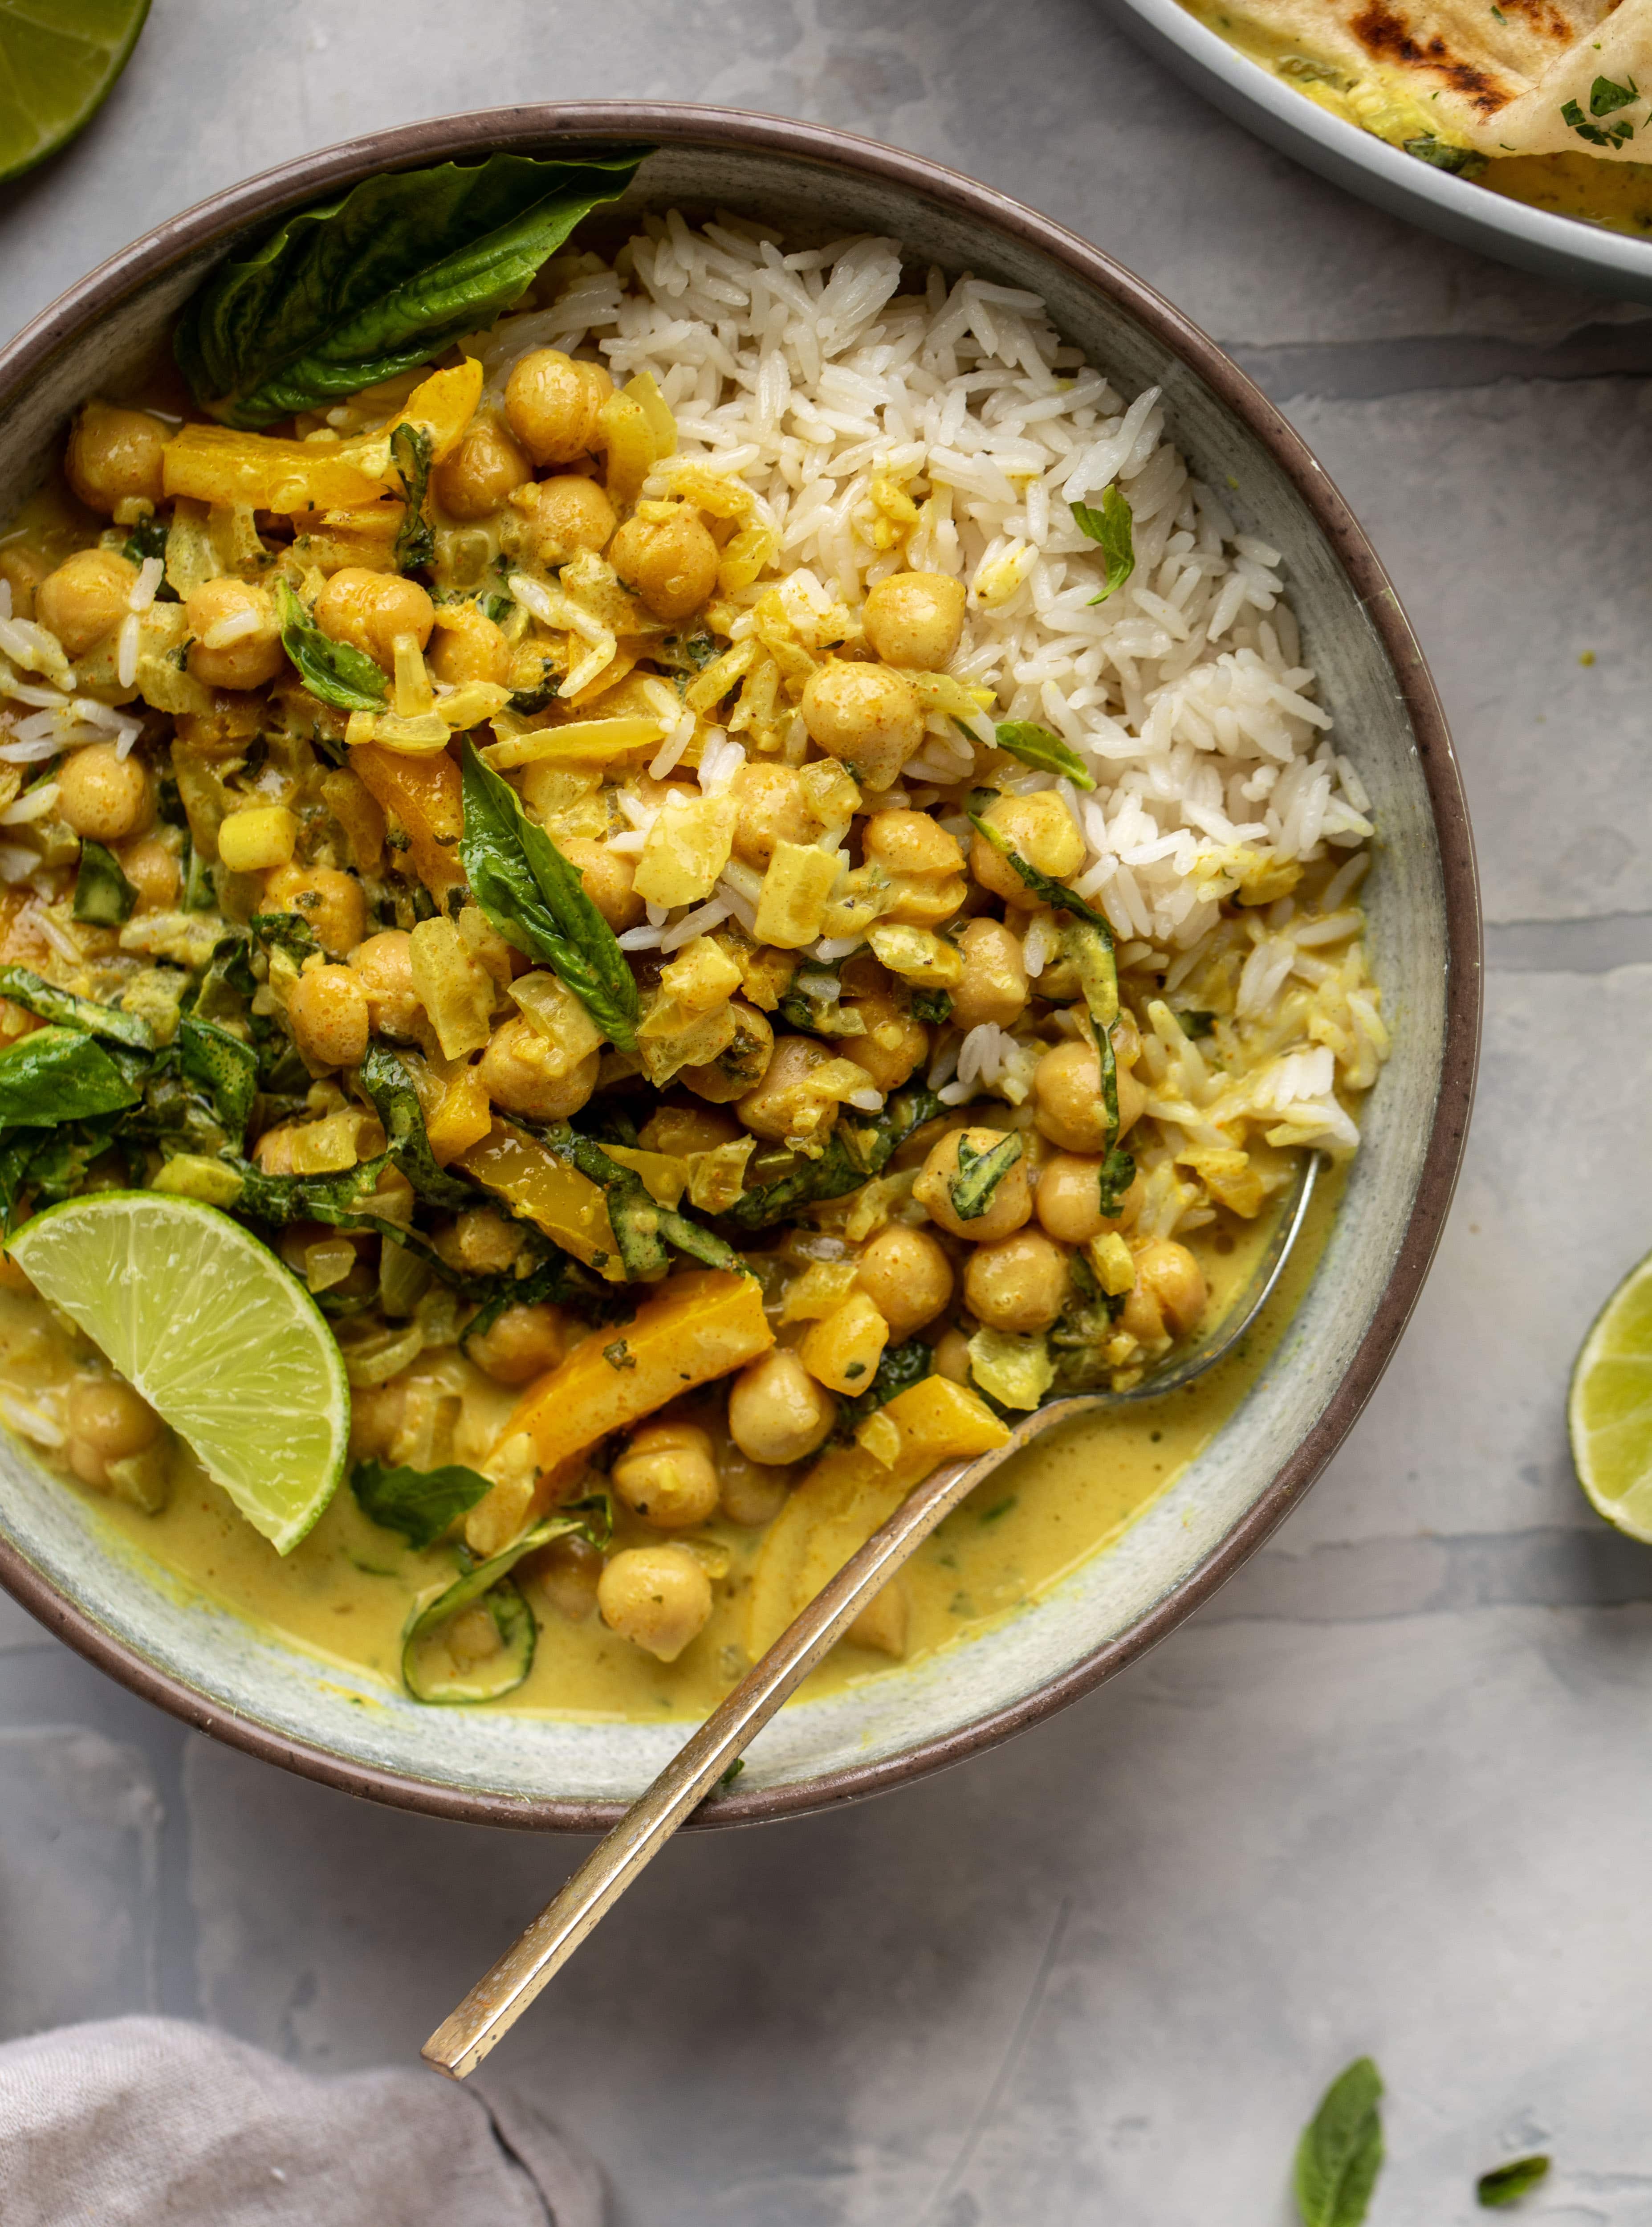 This basil chickpea coconut curry comes together in 20 minutes! Serve with jasmine rice or your favorite naan, or both! So easy and flavorful.